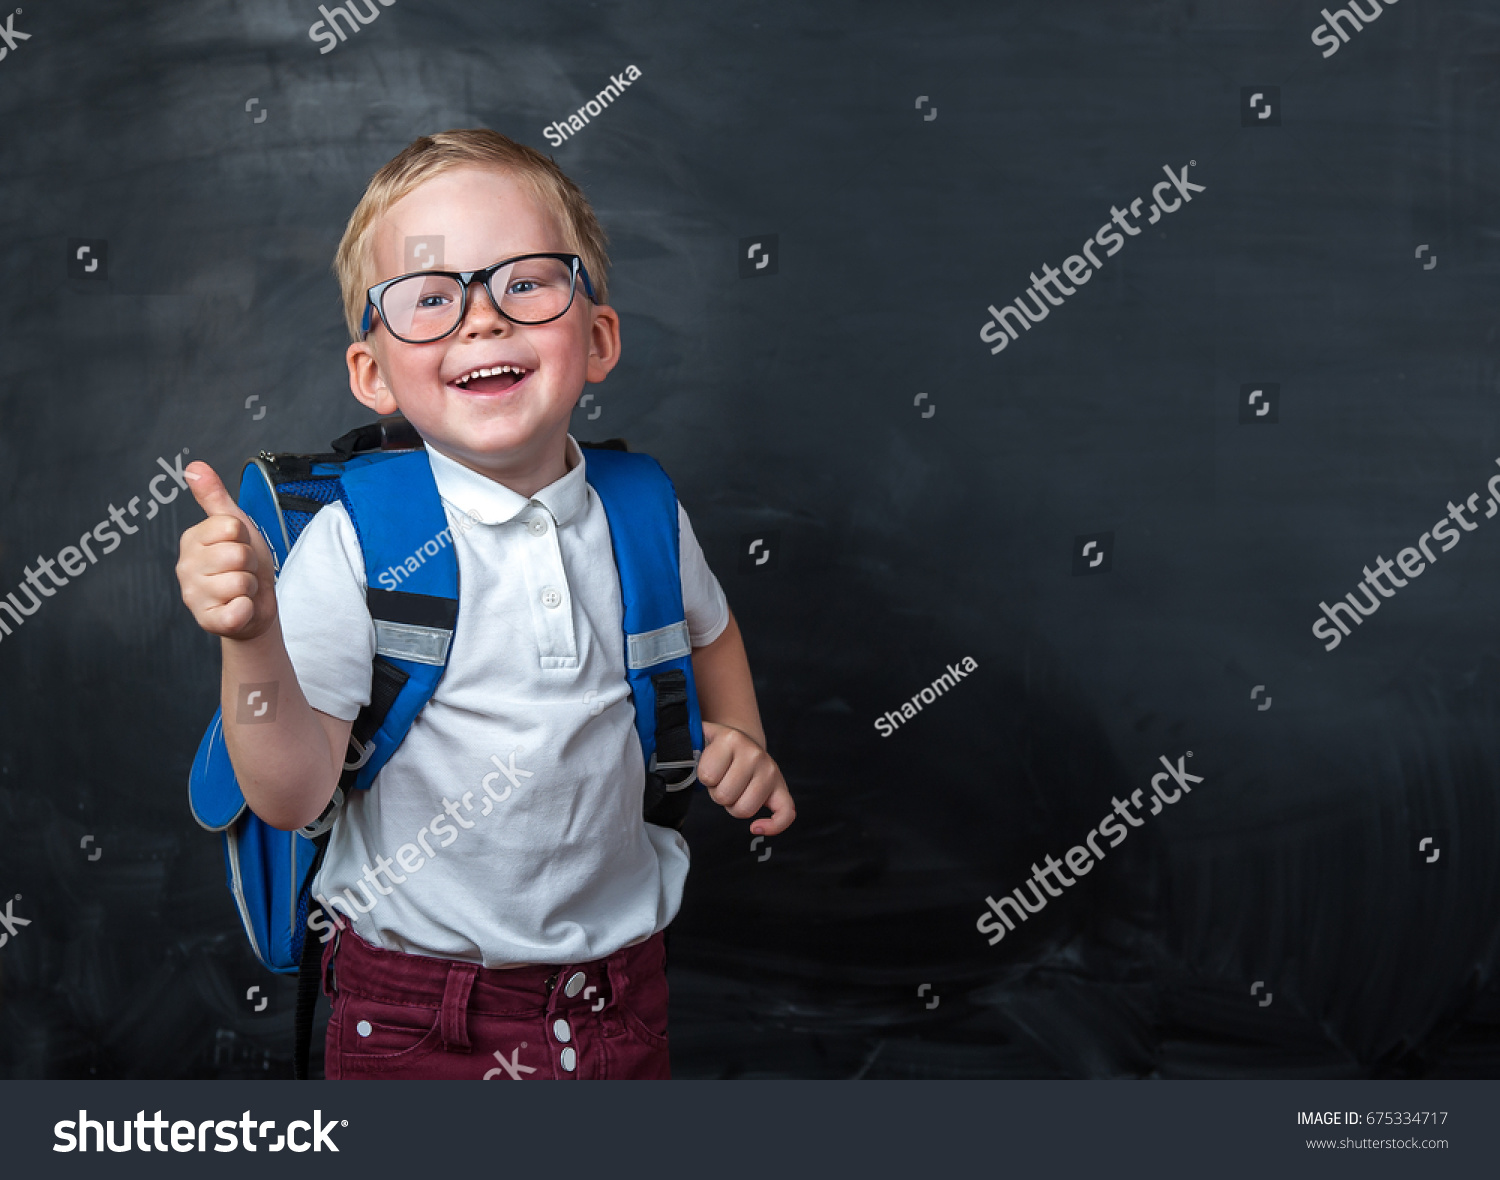 Happy smiling boy in glasses with thumb up is going to school for the first time. Child with school bag and book. Kid indoors of the class room with blackboard on a background. Back to school. #675334717